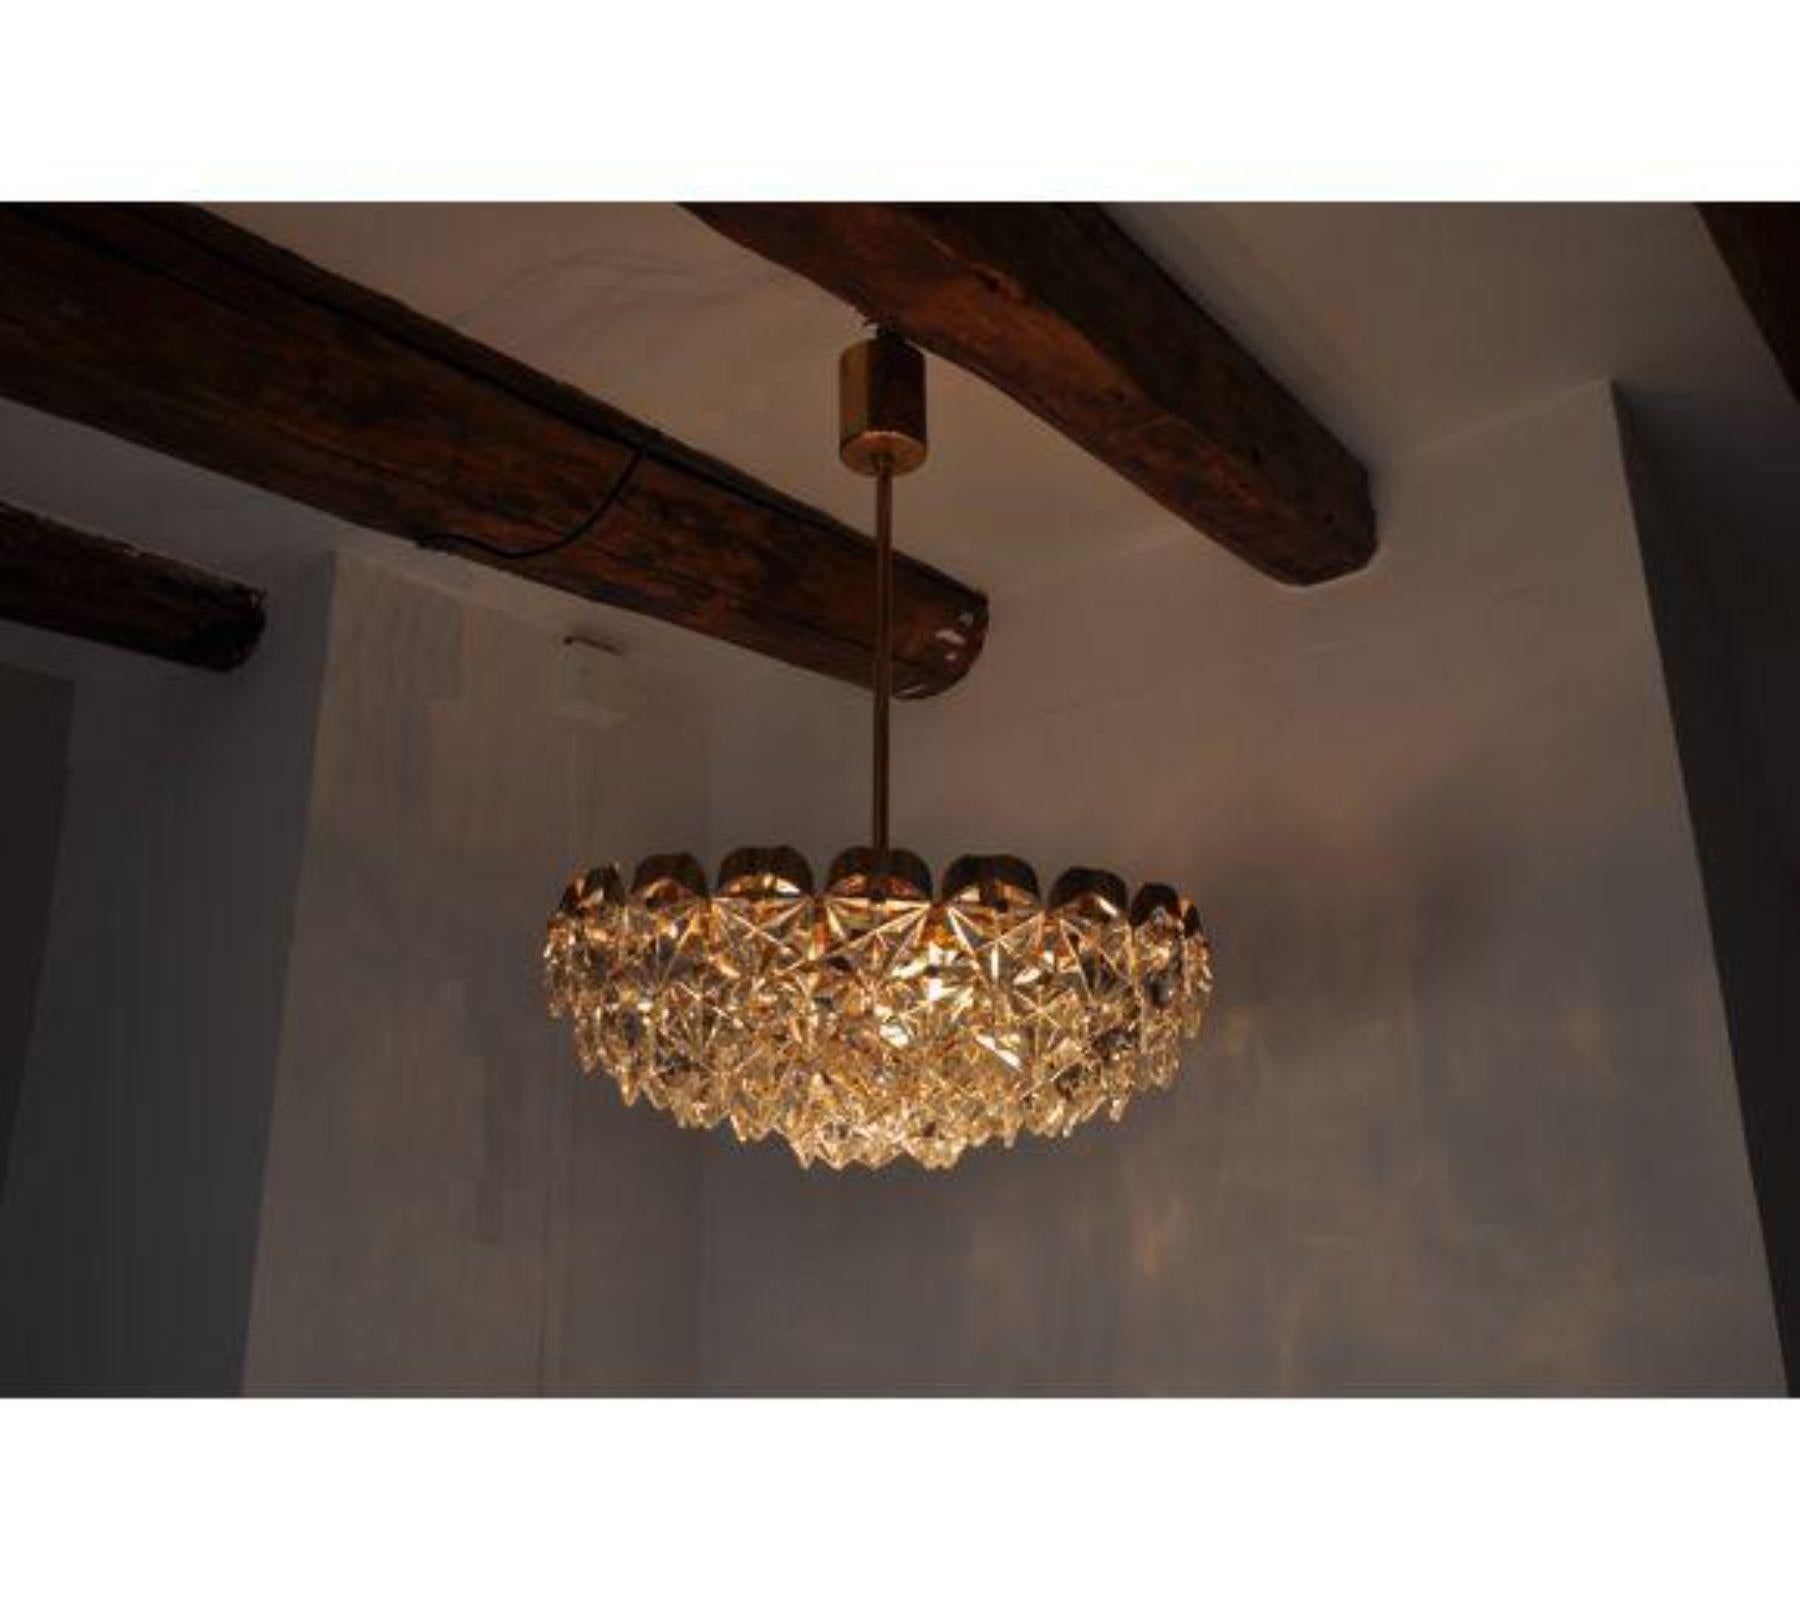 Impressive Kinkeldey chandelier designed and produced in Germany circa 1970s. Metallic gold platted structure with 6 levels and 83 crystals. A unique piece of design that will be a great highlight to your interior project. Object in mint conditions.